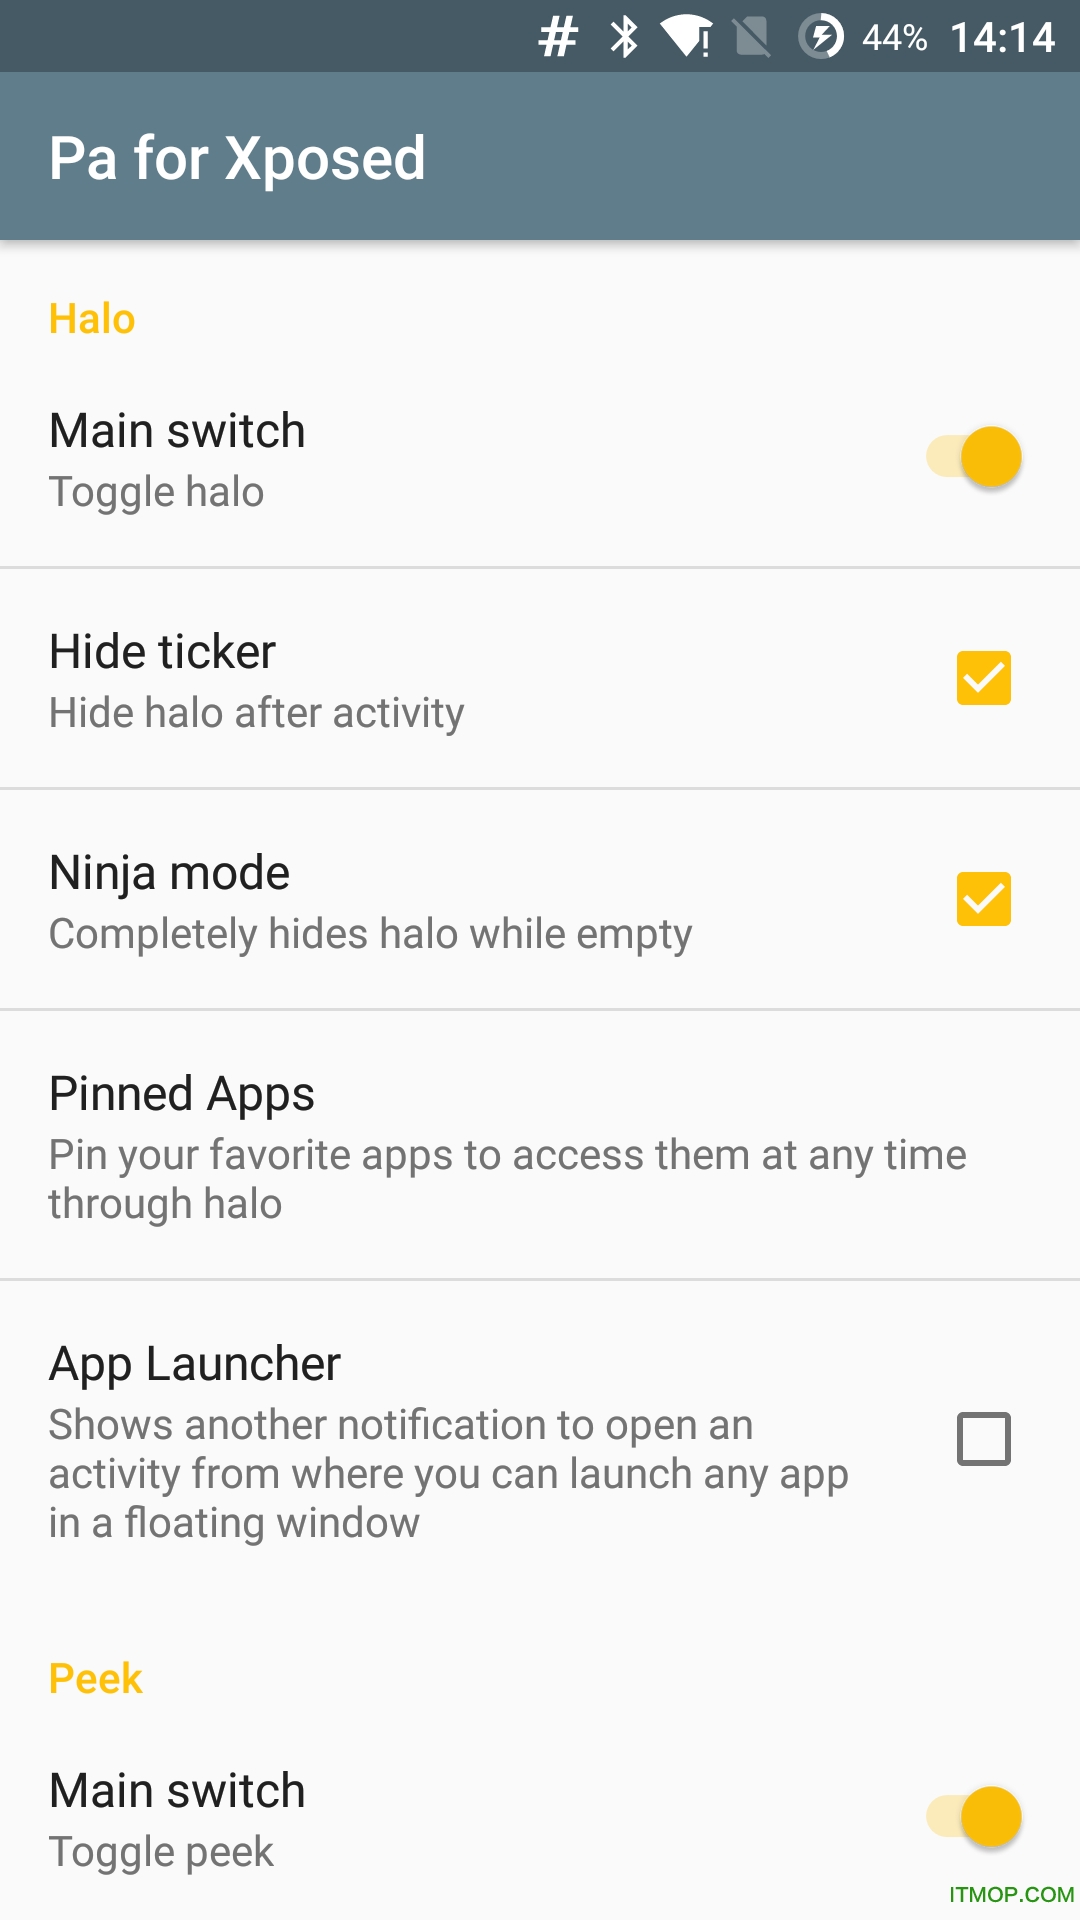 Pa for Xposed(Unique Controls Android) v0.317 ׿0